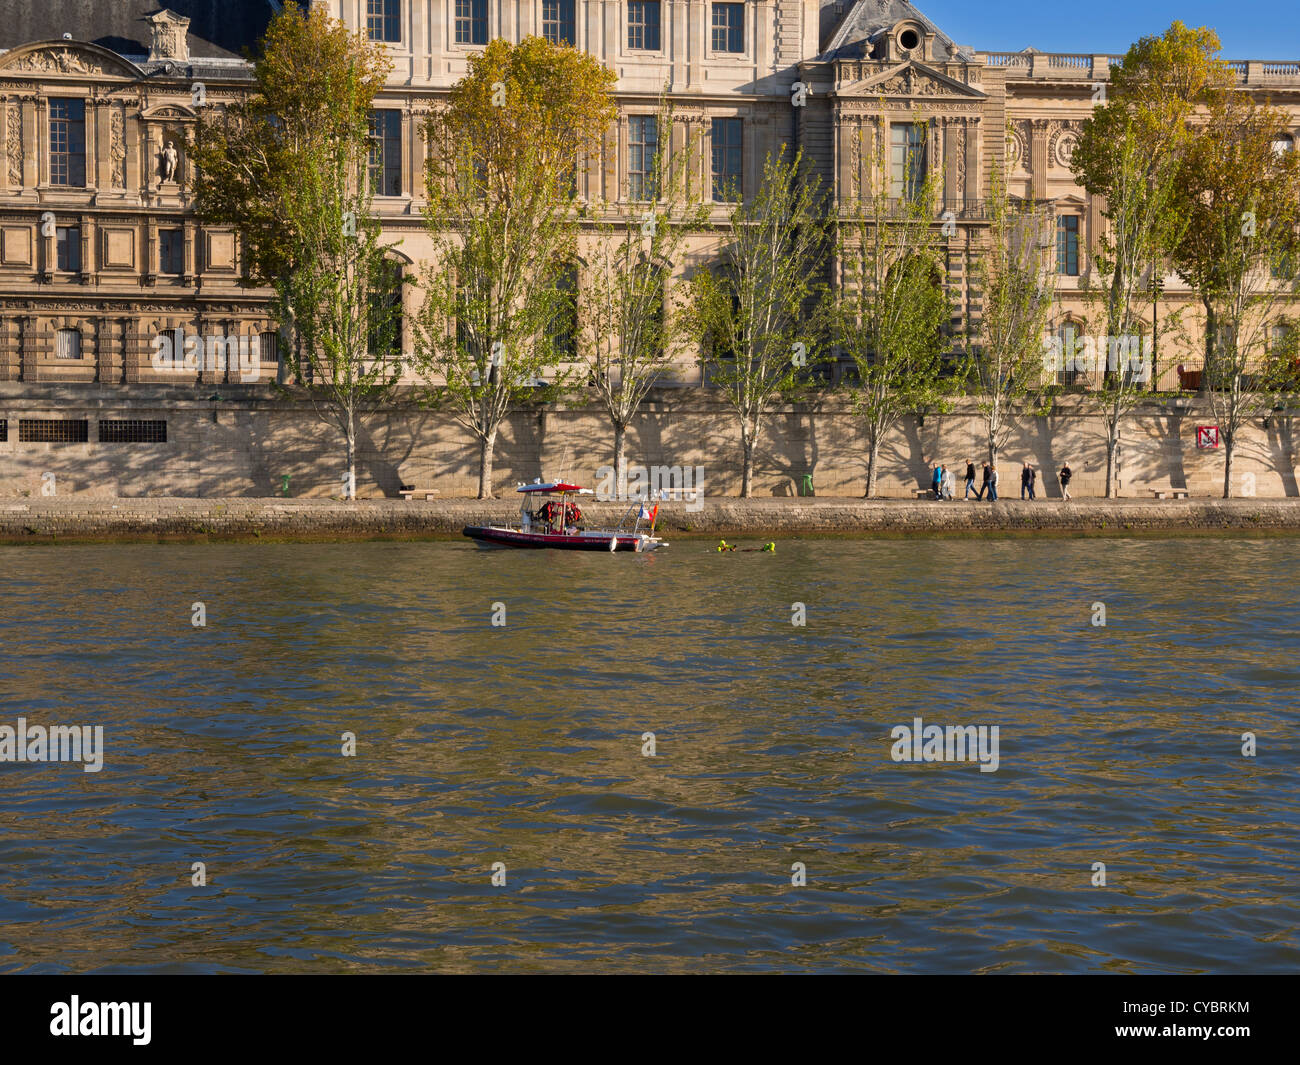 Fire Services rescue boat on the Seine River, Paris. Firemen on a rescue boat practice on the Seine in front of the Louvre. Stock Photo